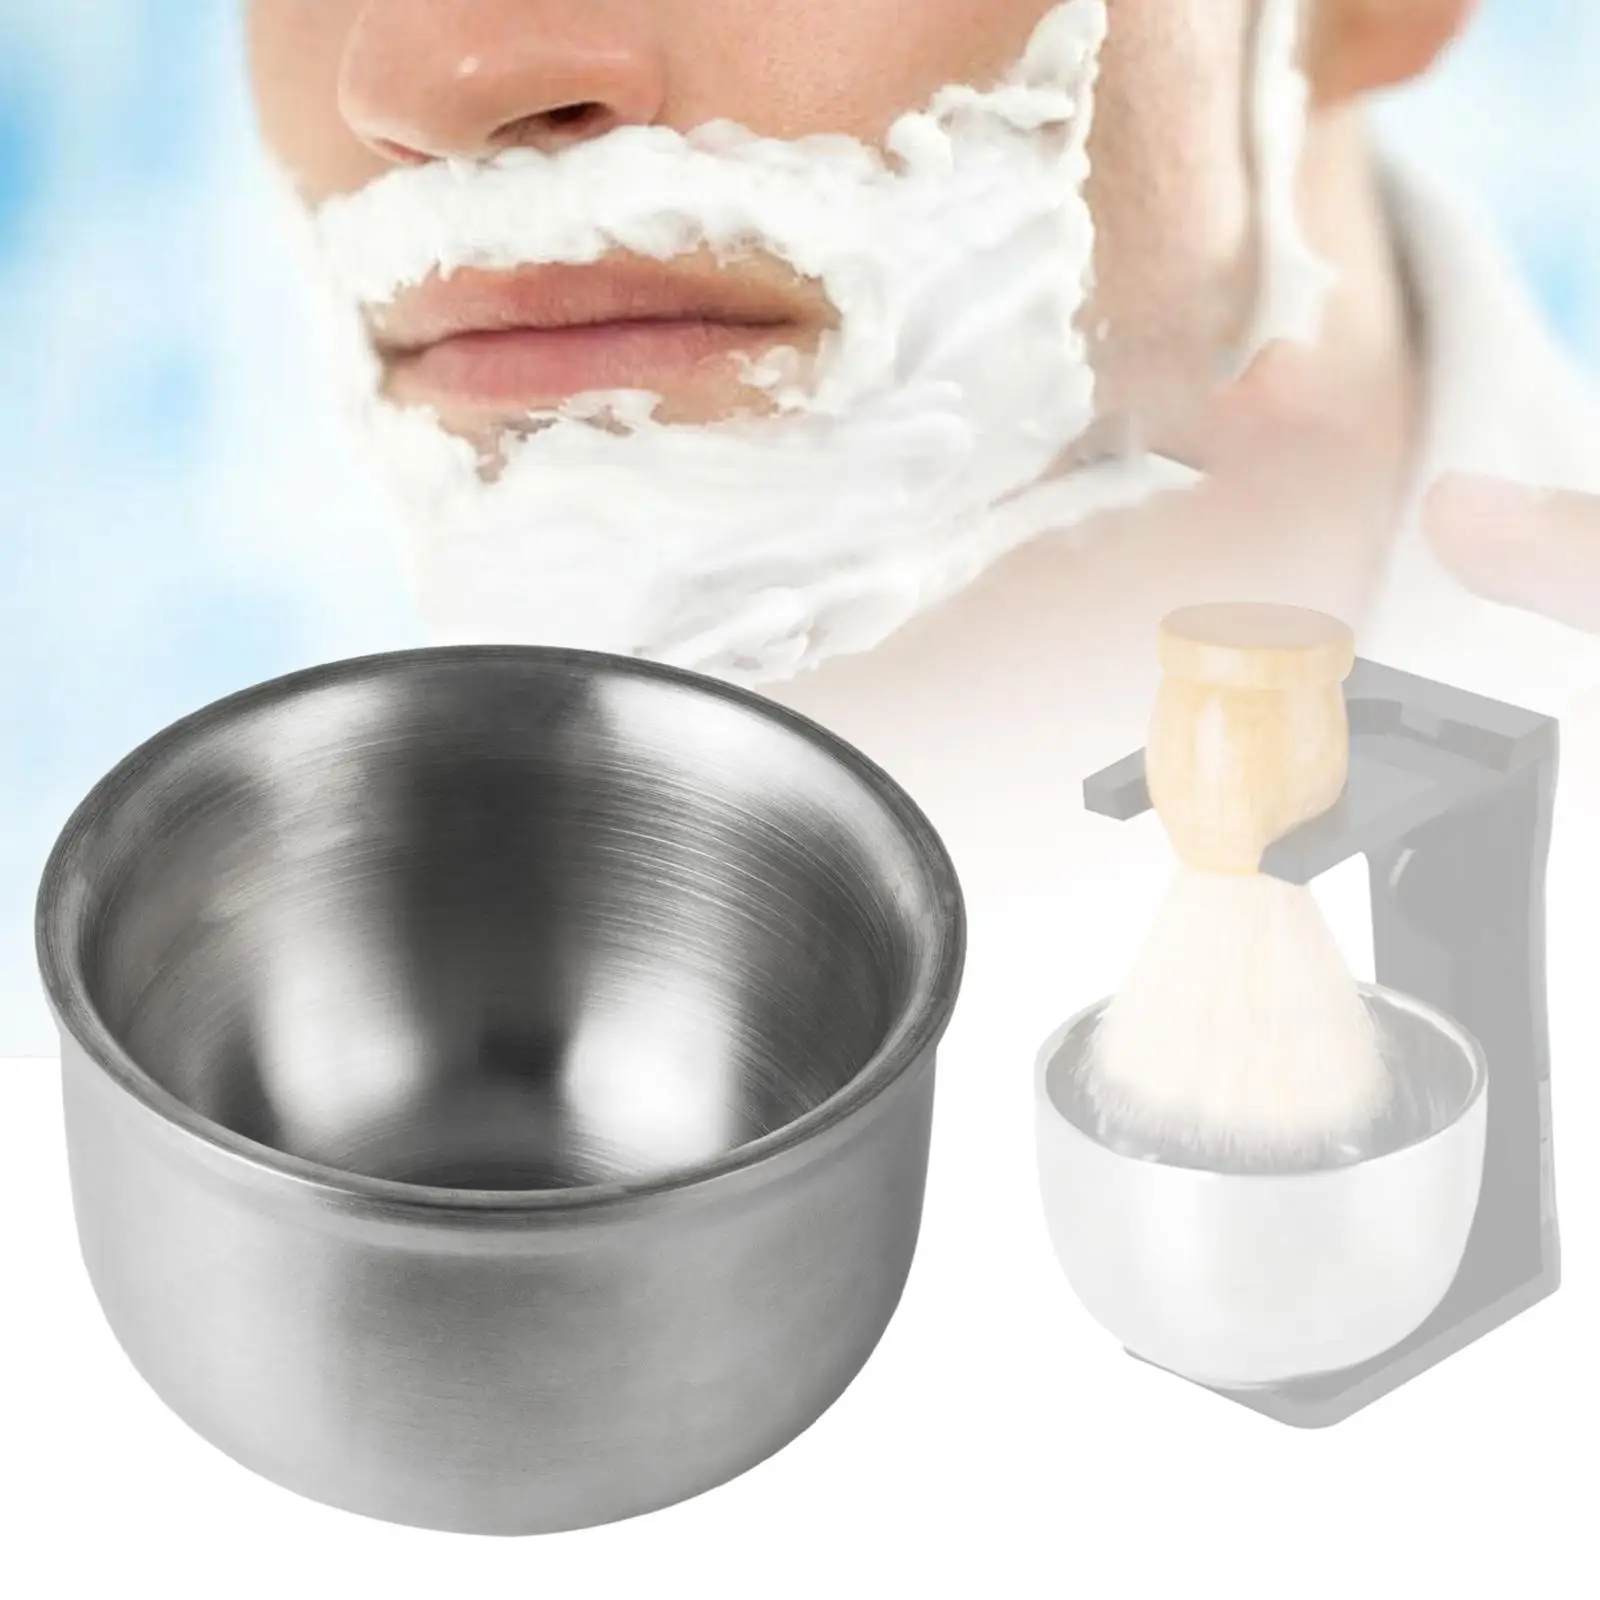 Shaving Bowl Shaving Mug Smooth Easy to Lather Small Heat Insulation Shave Soap Cup Shaving Cup for Gift Men